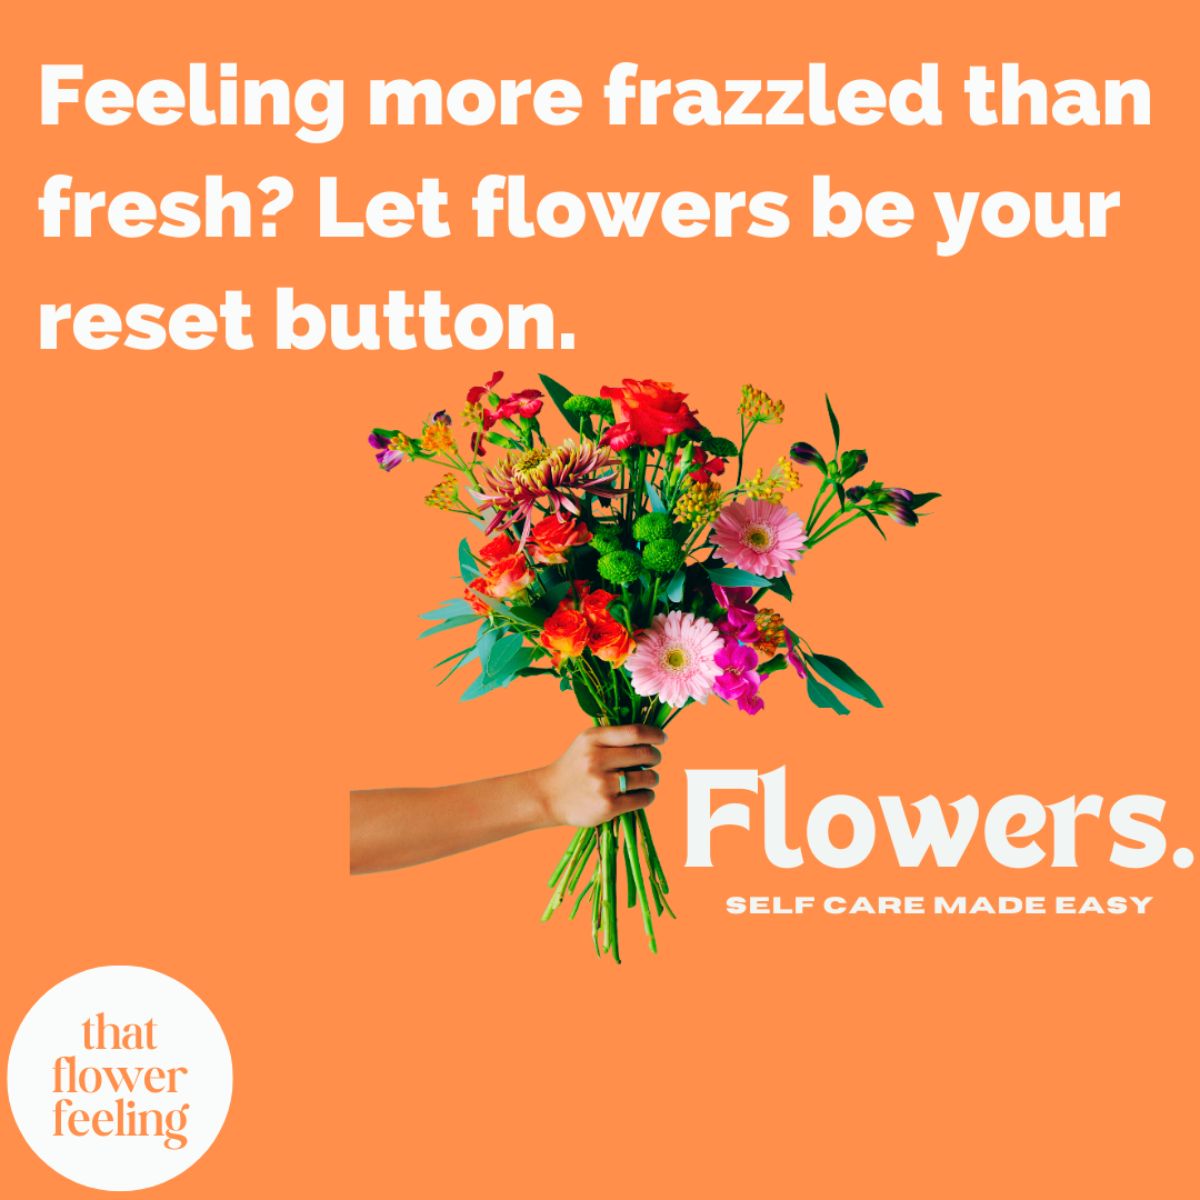 Let flowers be your reset button